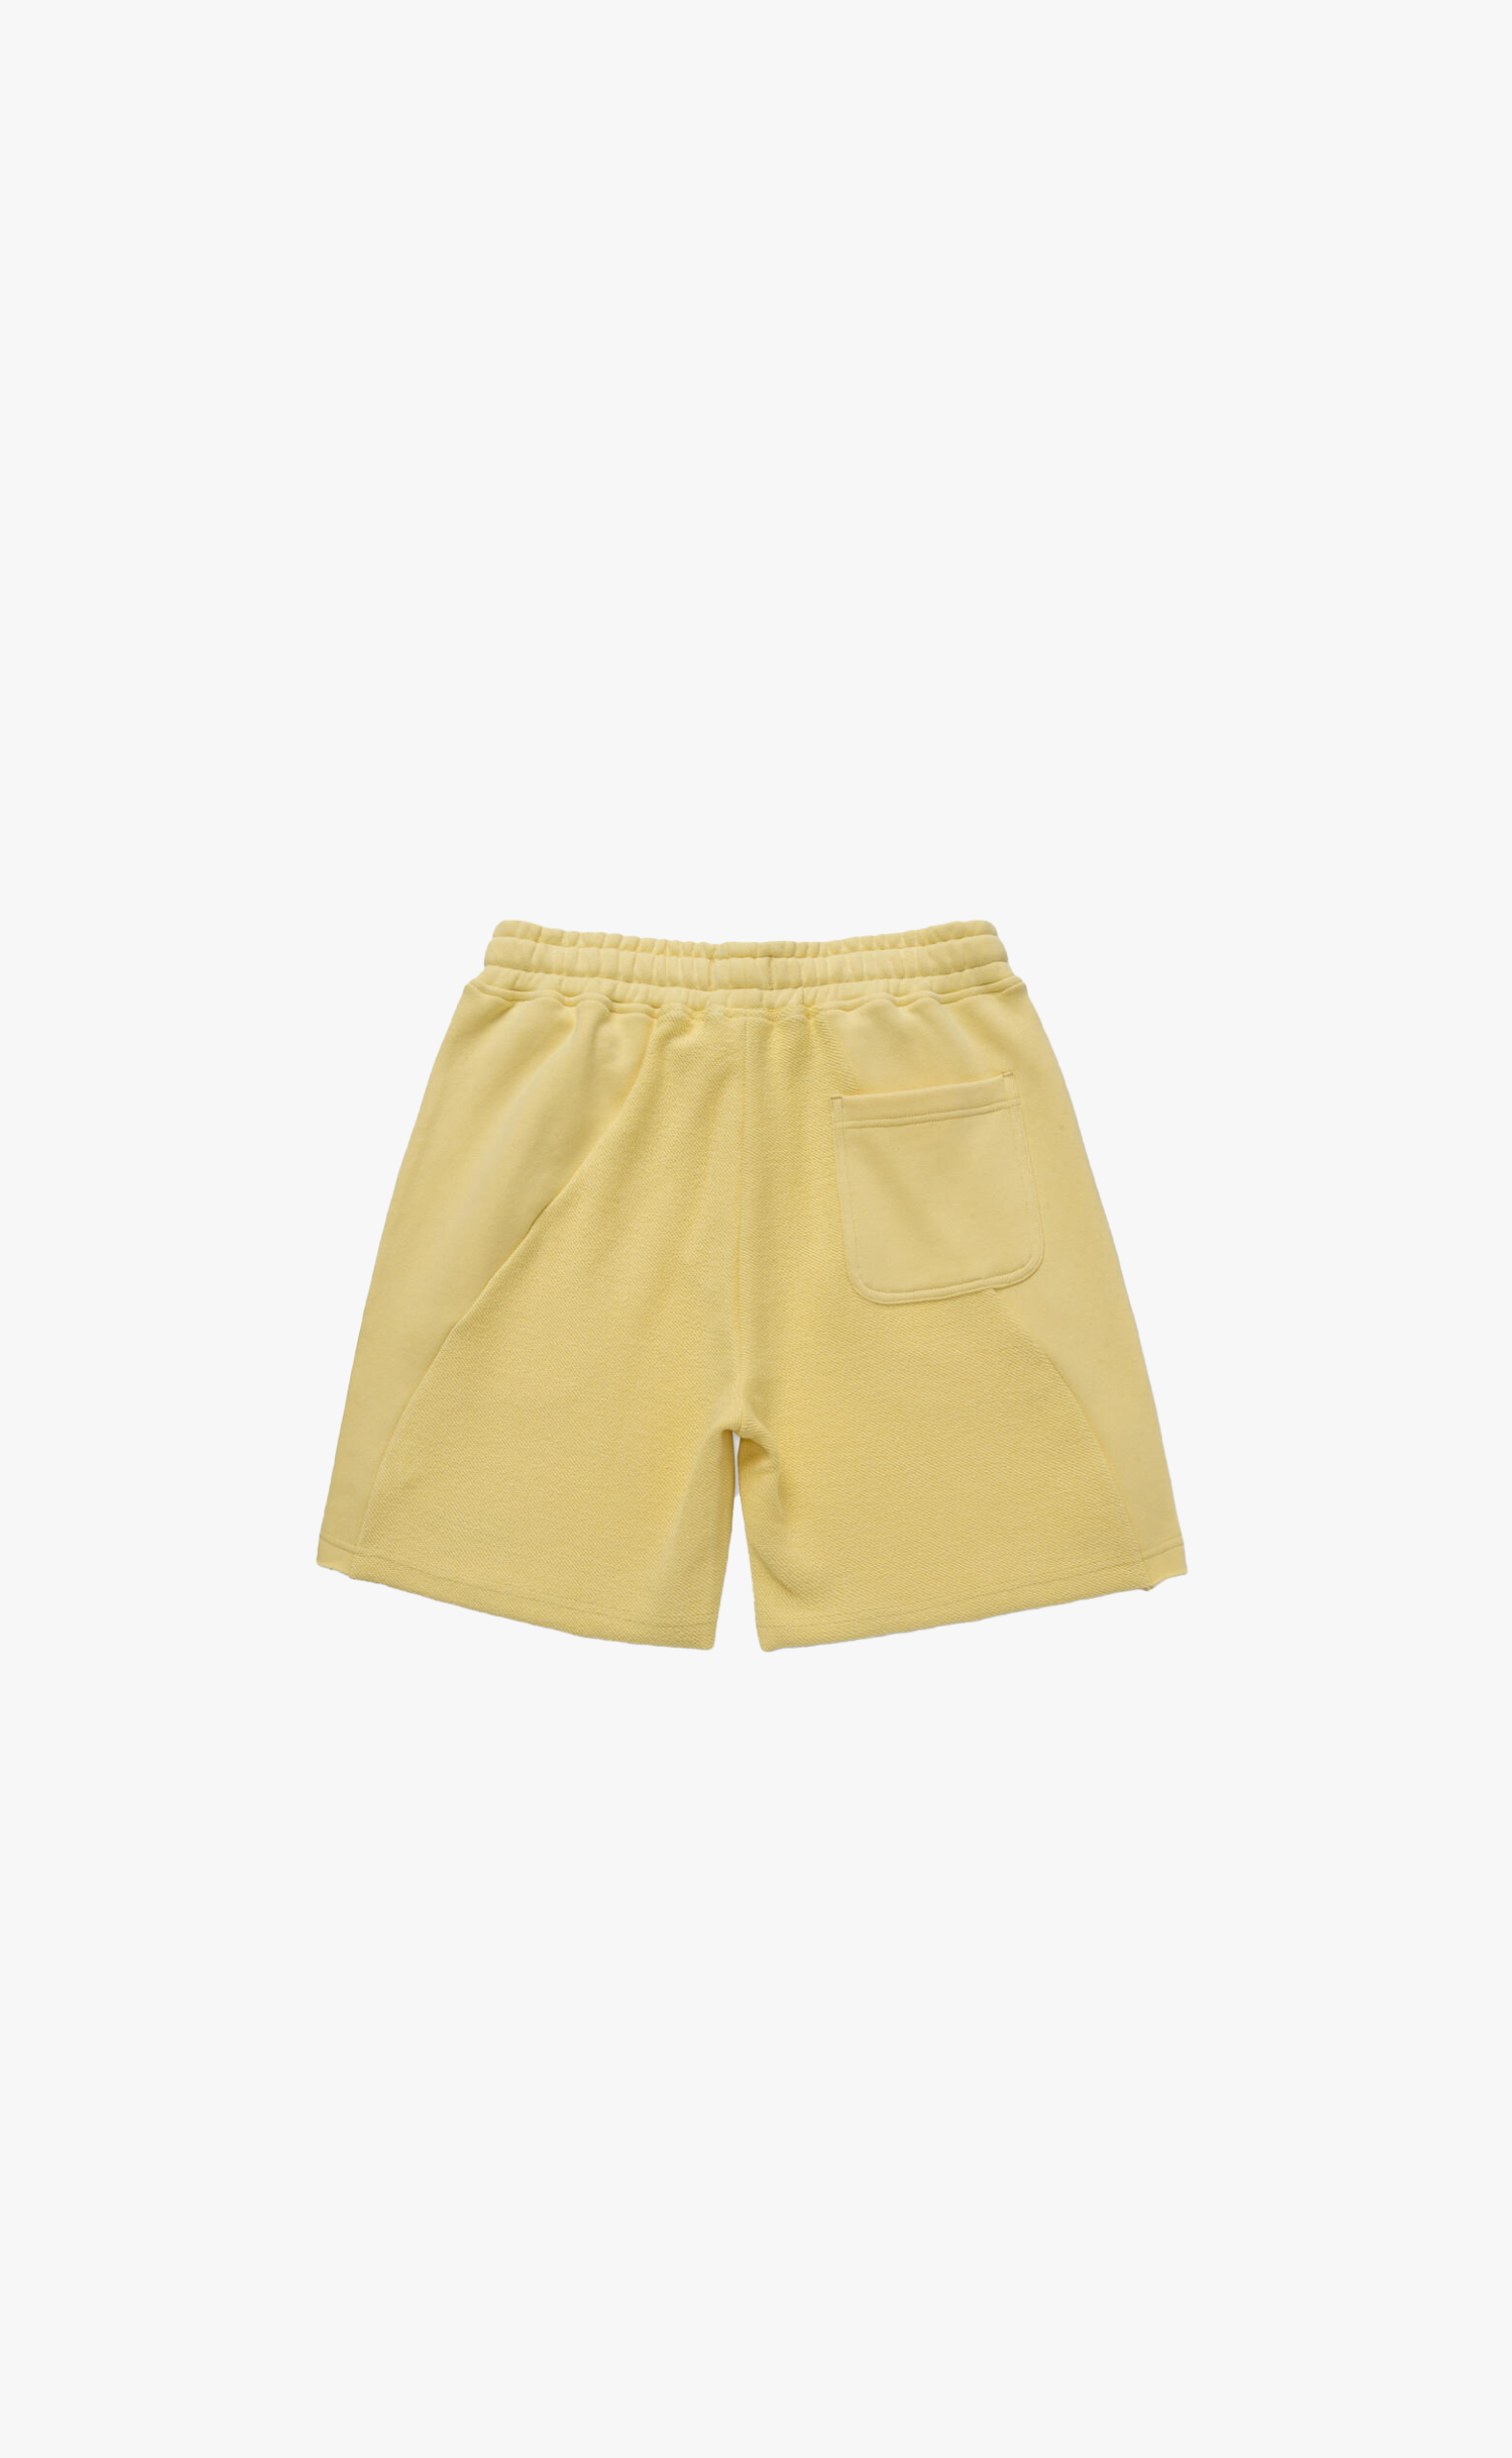 PANEL TERRY YELLOW SHORTS